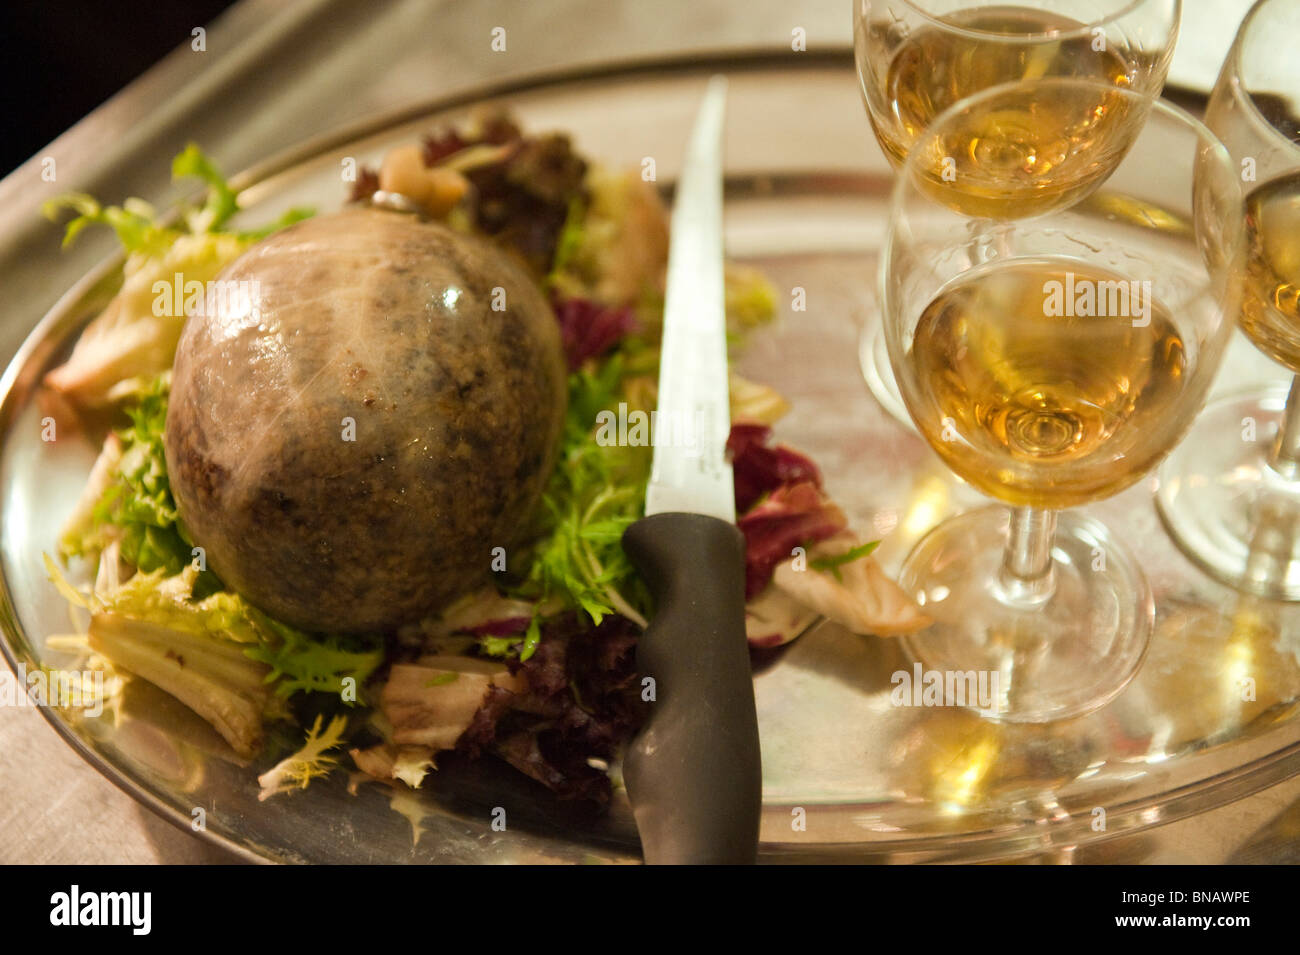 A tray with haggis and glasses of whisky at Burn''s supper night Stock Photo